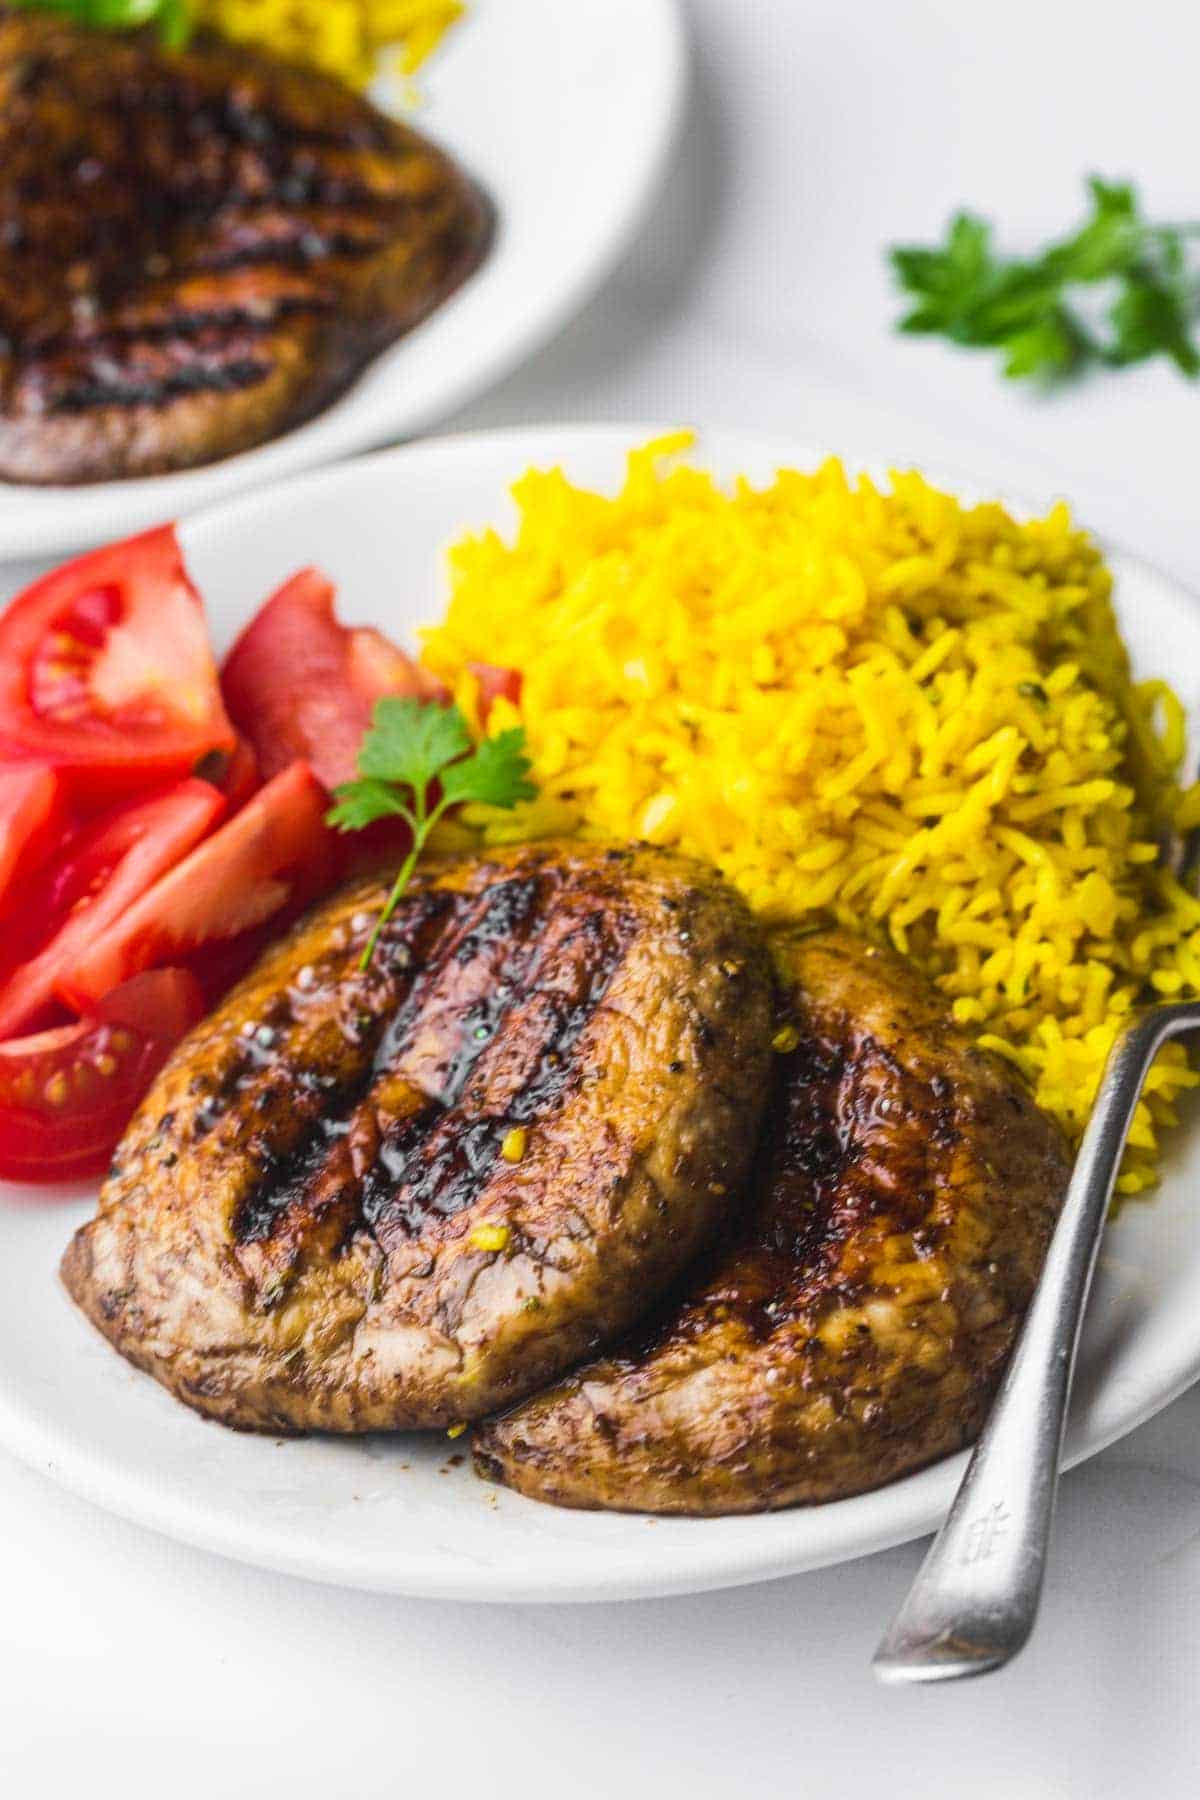 2 grilled portobello mushrooms served on a plate with turmeric rice and sliced fresh tomatoes